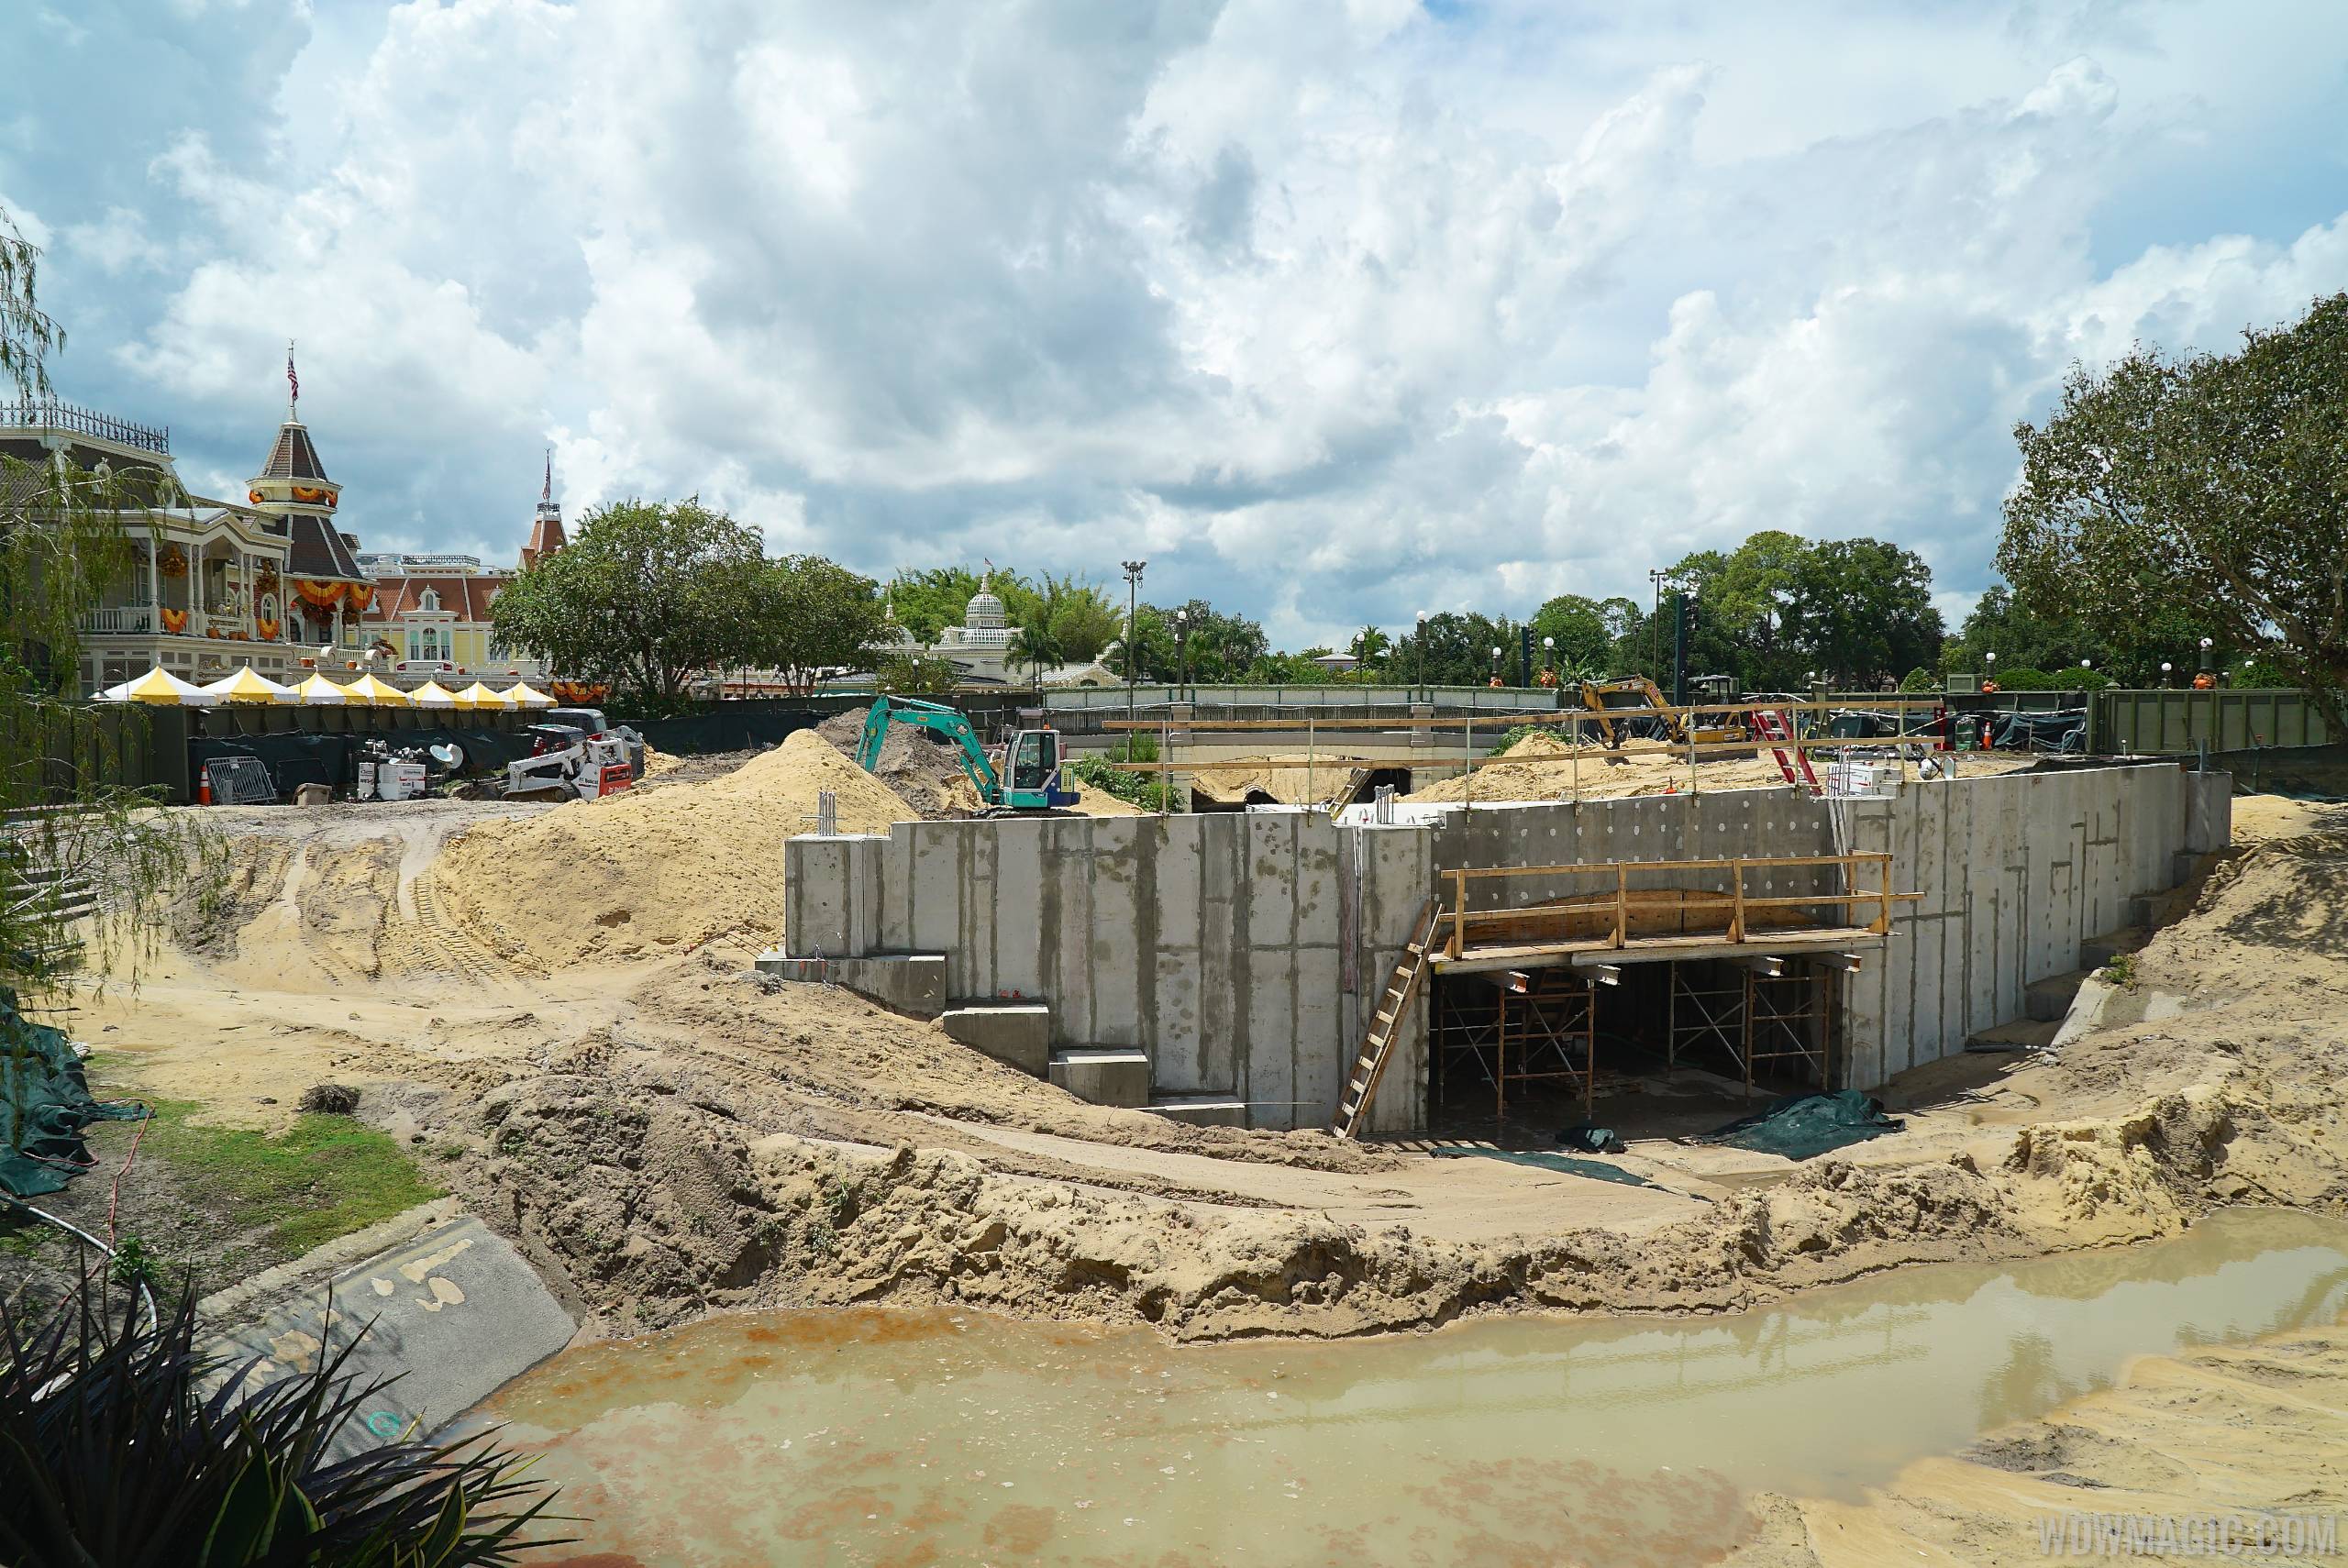 PHOTOS - A look at the Magic Kingdom's hub redevelopment project